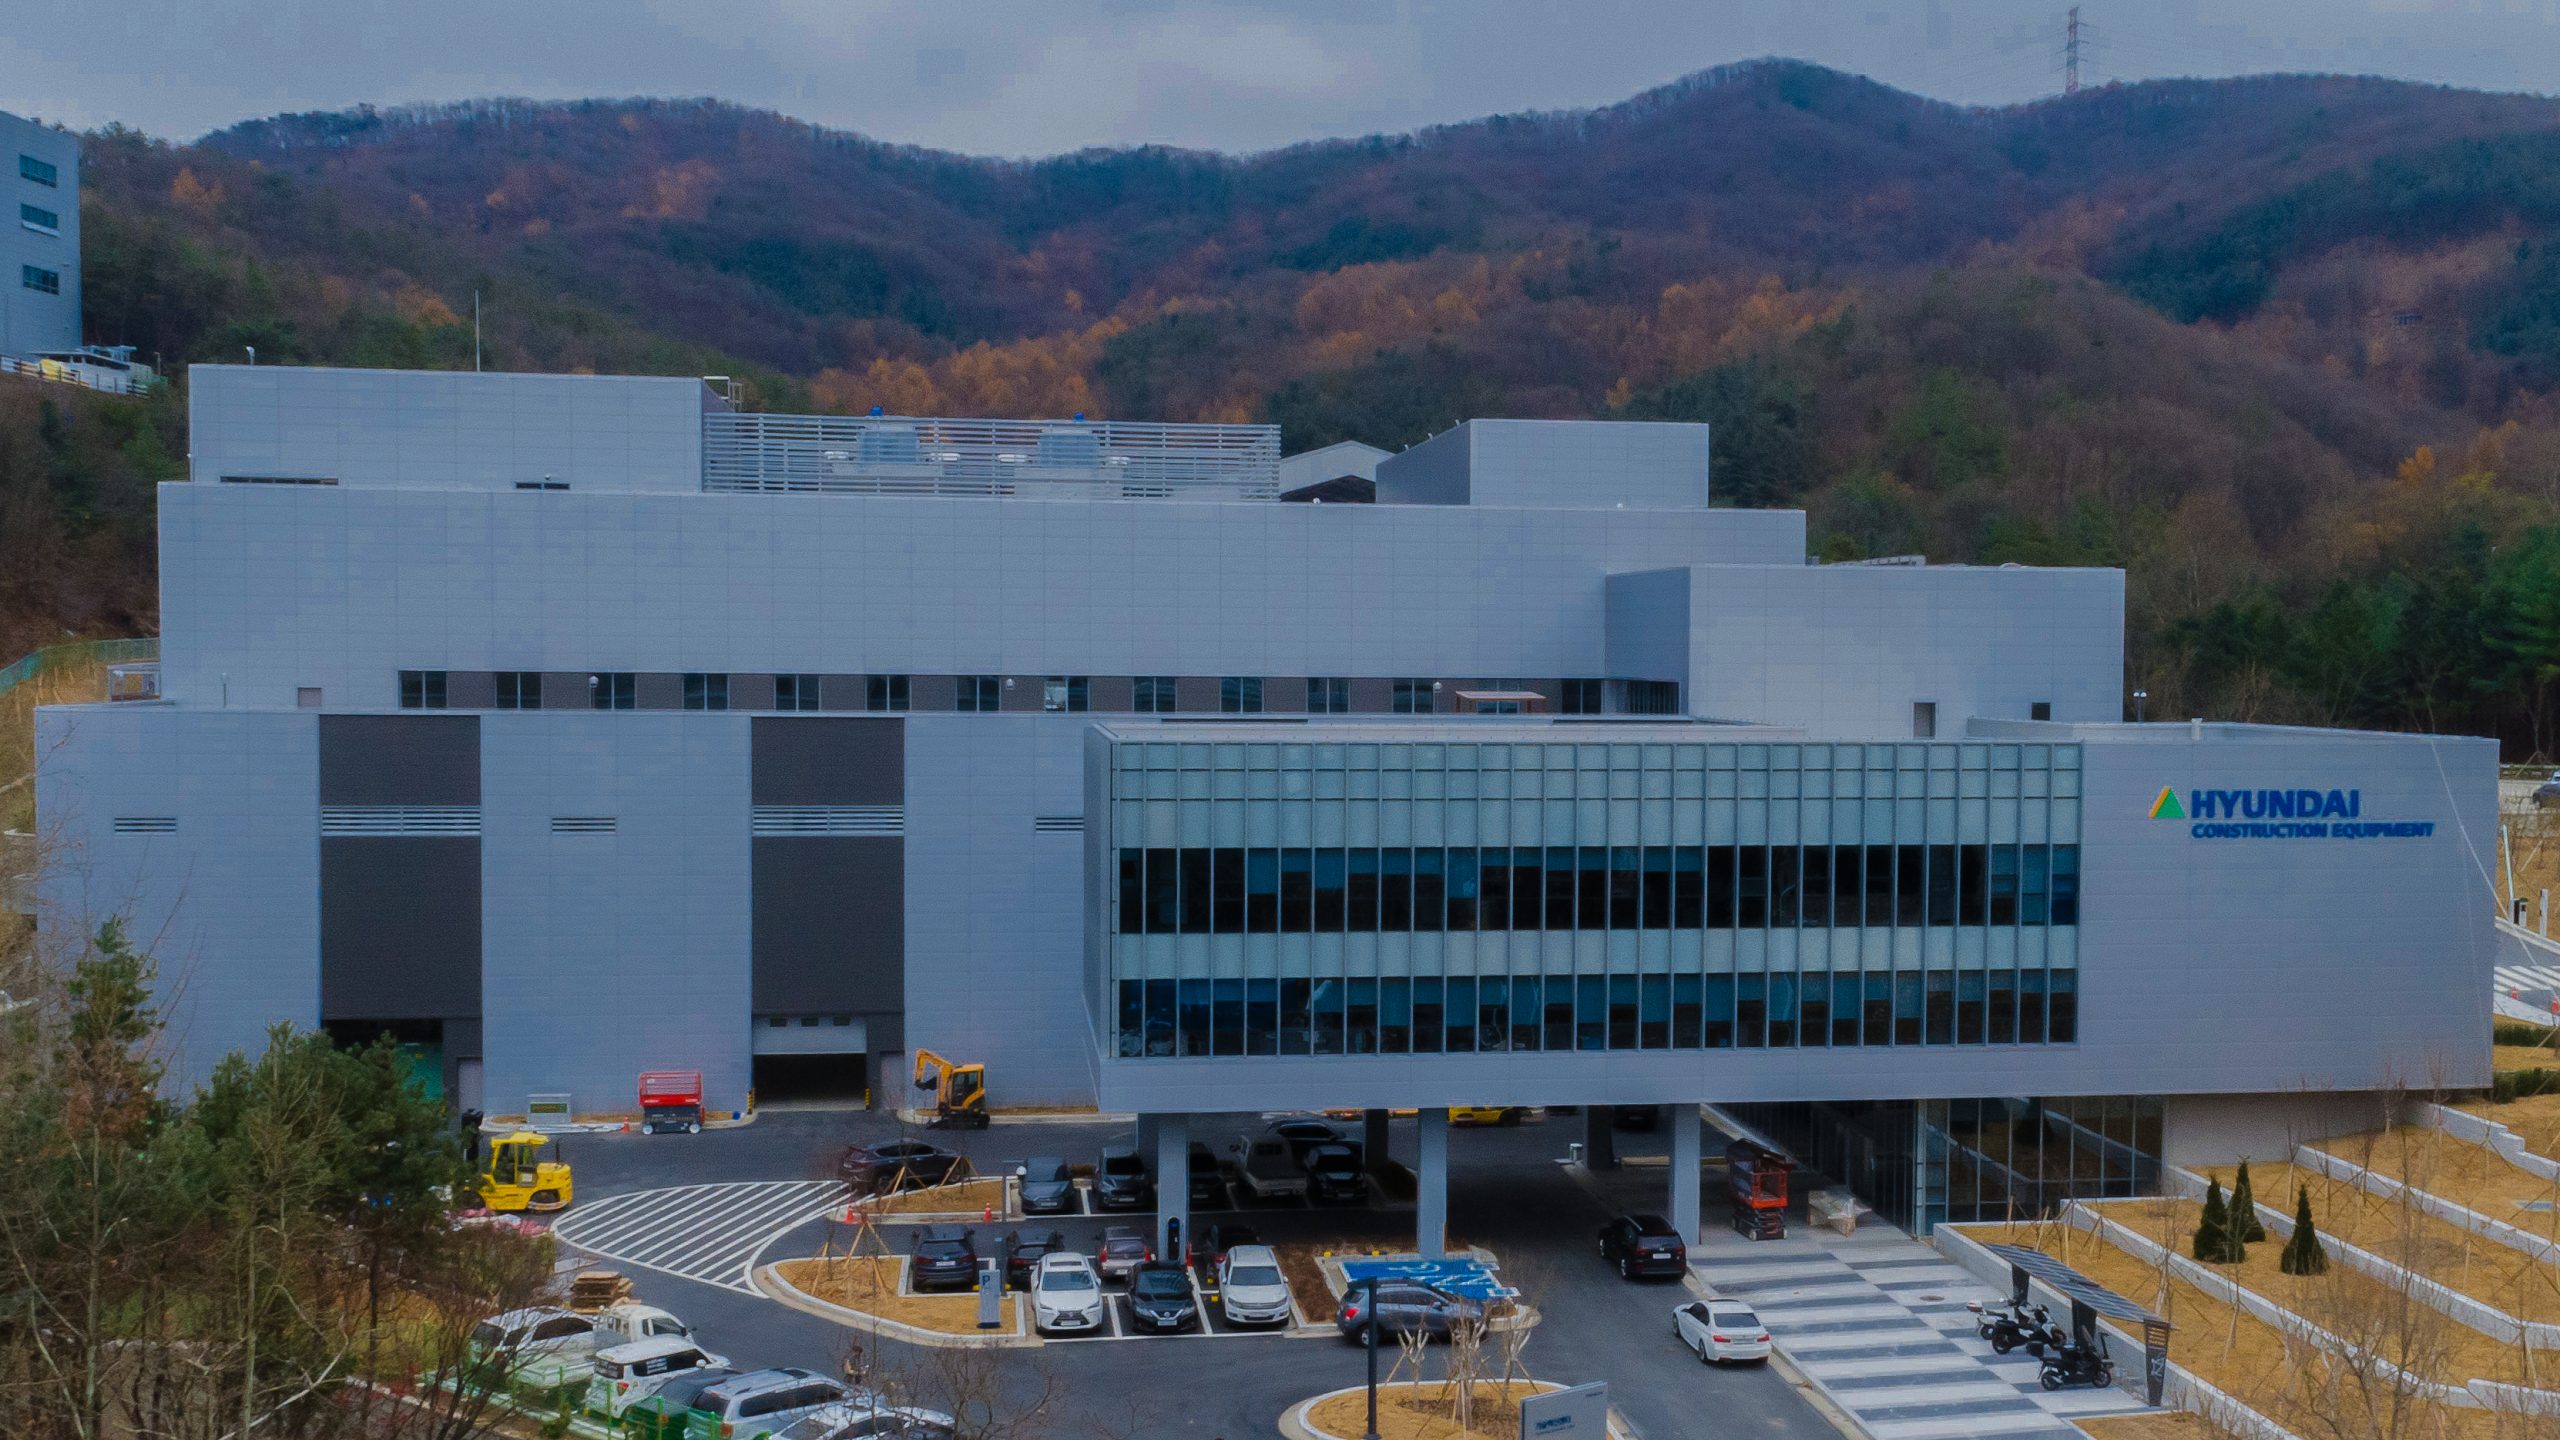 Hyundai Construction Equipment Completes Construction of “Technology Innovation Center”  the cradle of quality innovation